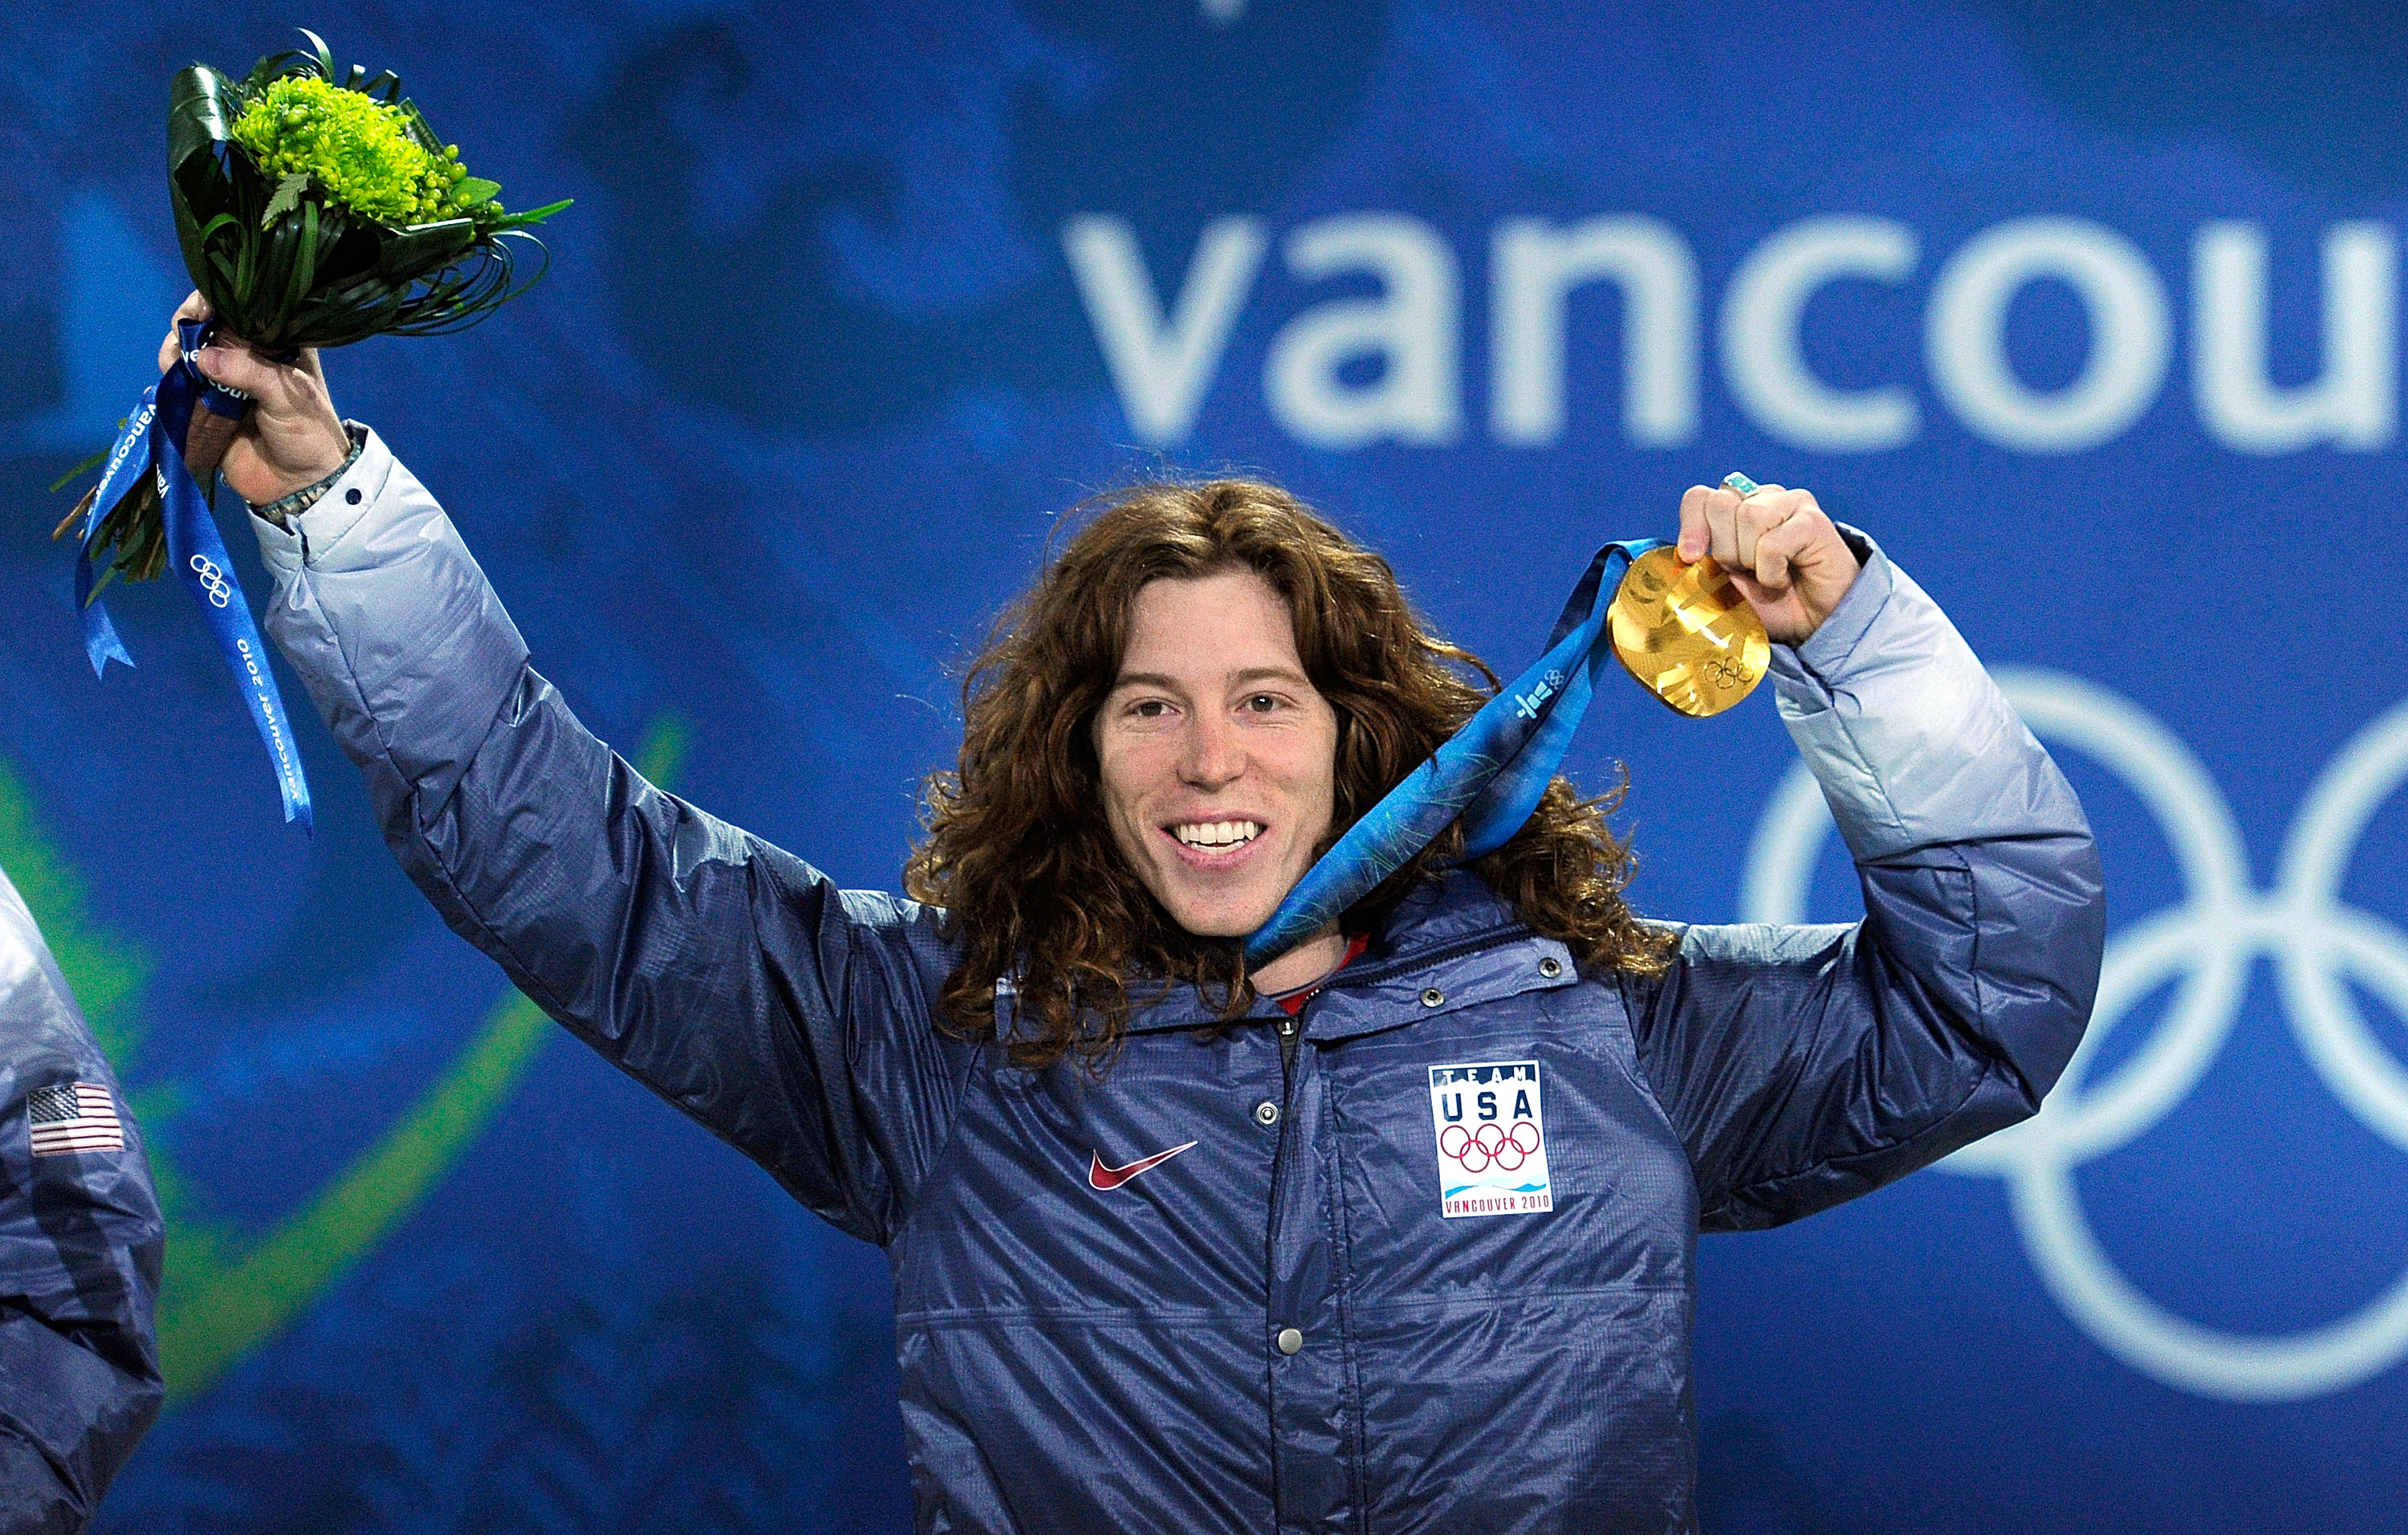 Shaun White of United States celebrates his gold medal during the 2010 Vancouver medal ceremony for the Men's Halfpipe in Canada. Kevork Djansezian—Getty Images (Kevork Djansezian—Getty Images)